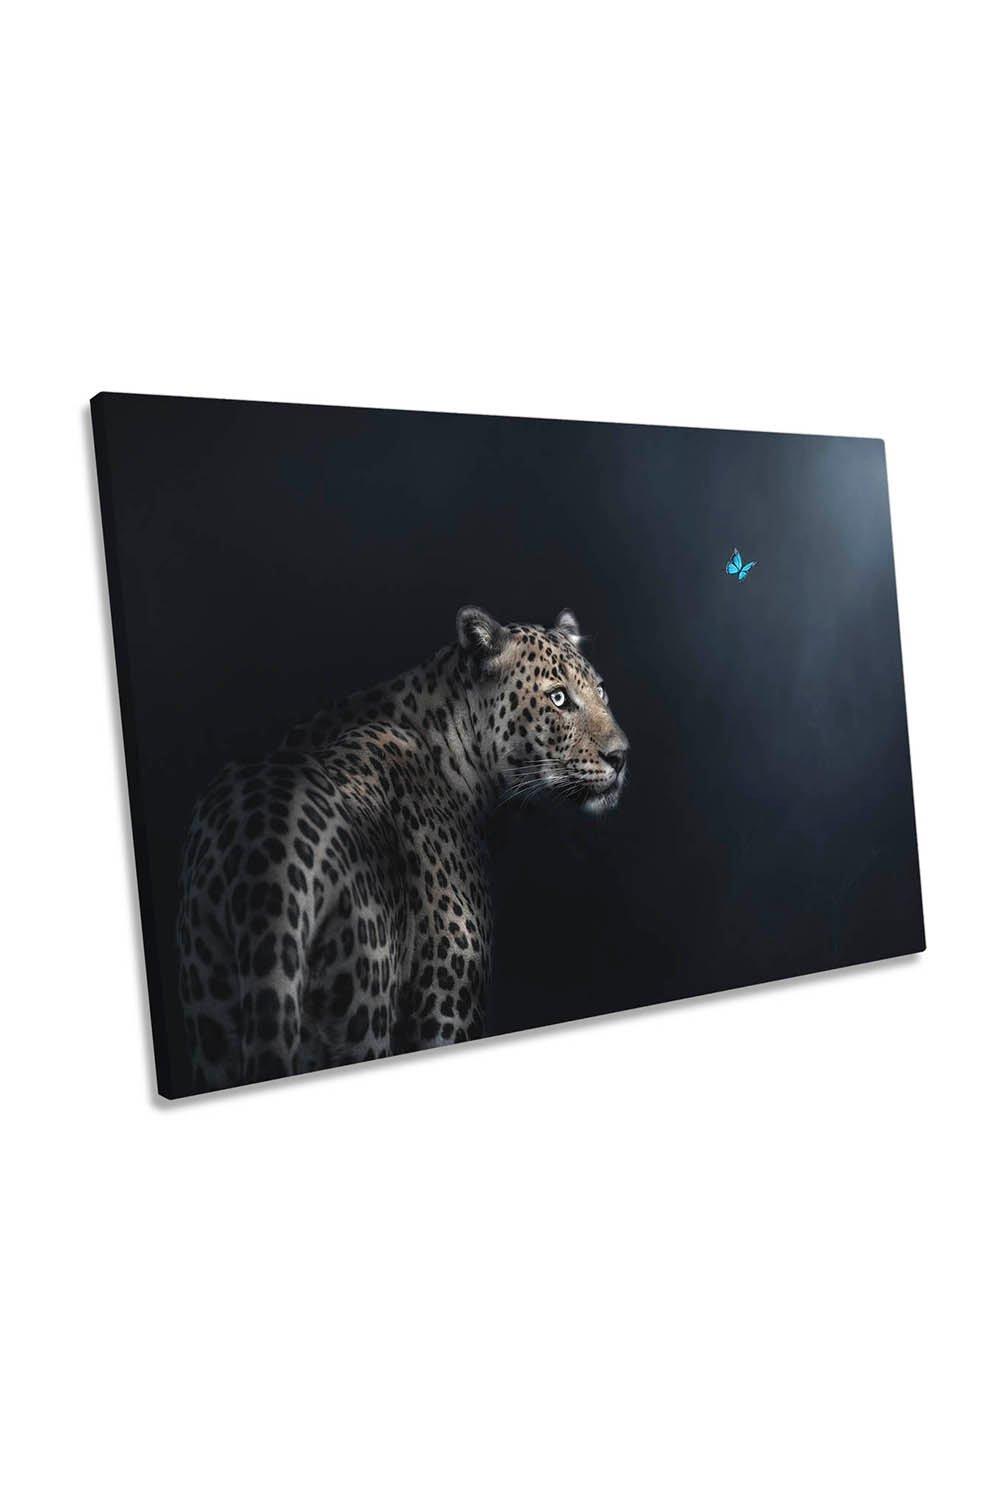 Imagination Cheetah Butterfly Canvas Wall Art Picture Print